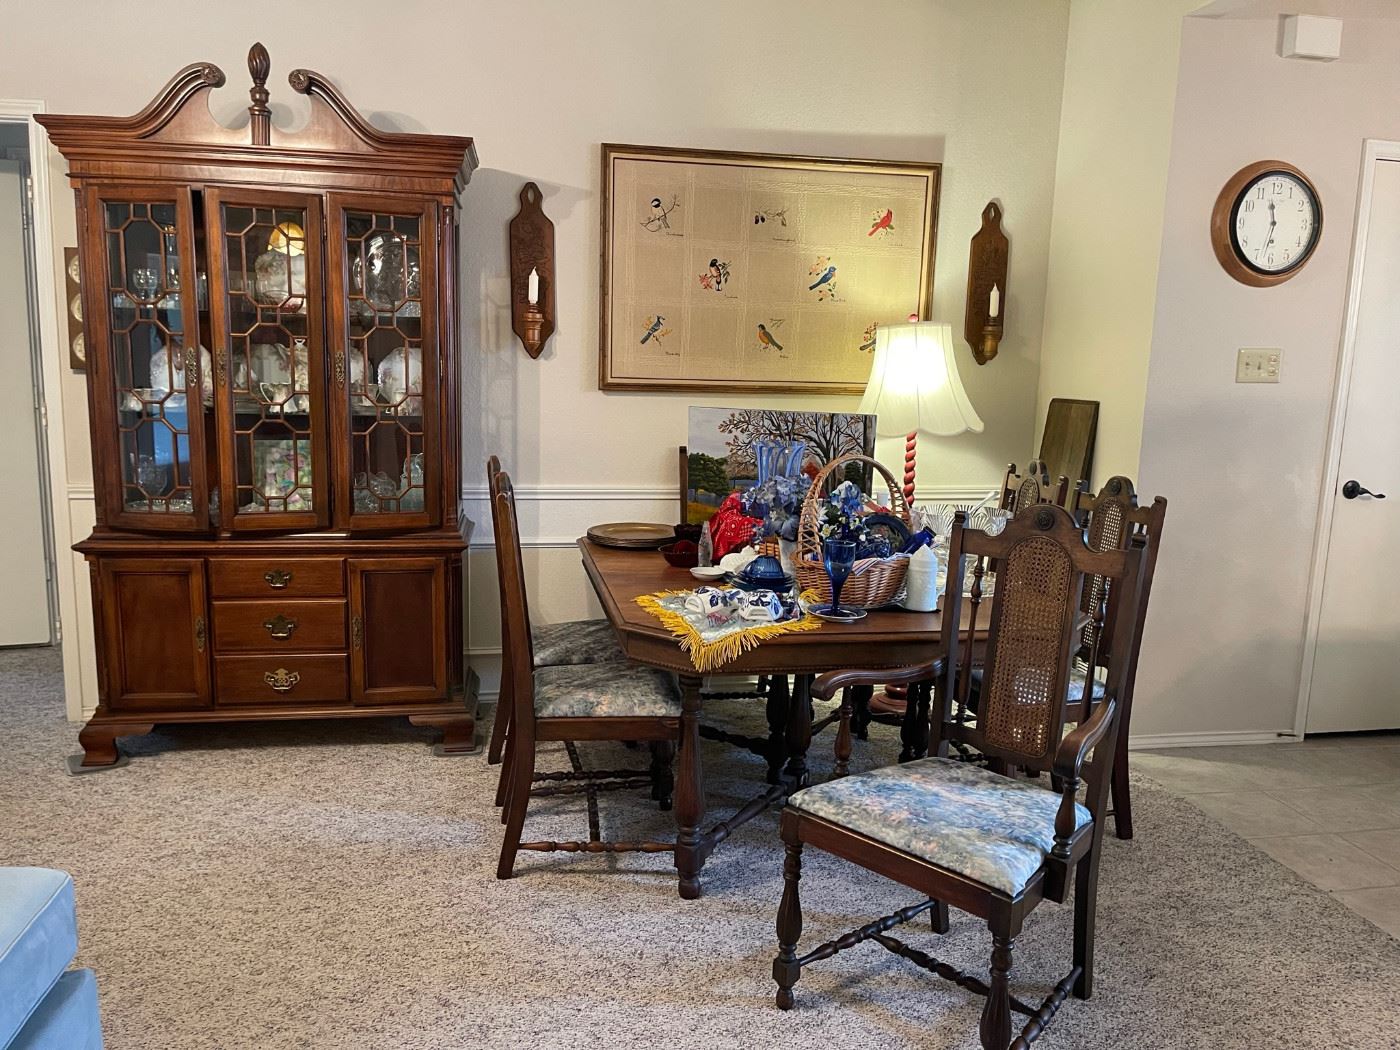 The lighted china cabinet is from the American Independence Collection and inspired by the original furnishings of Independence Hall. Vintage dining table with leaf and six high back chairs